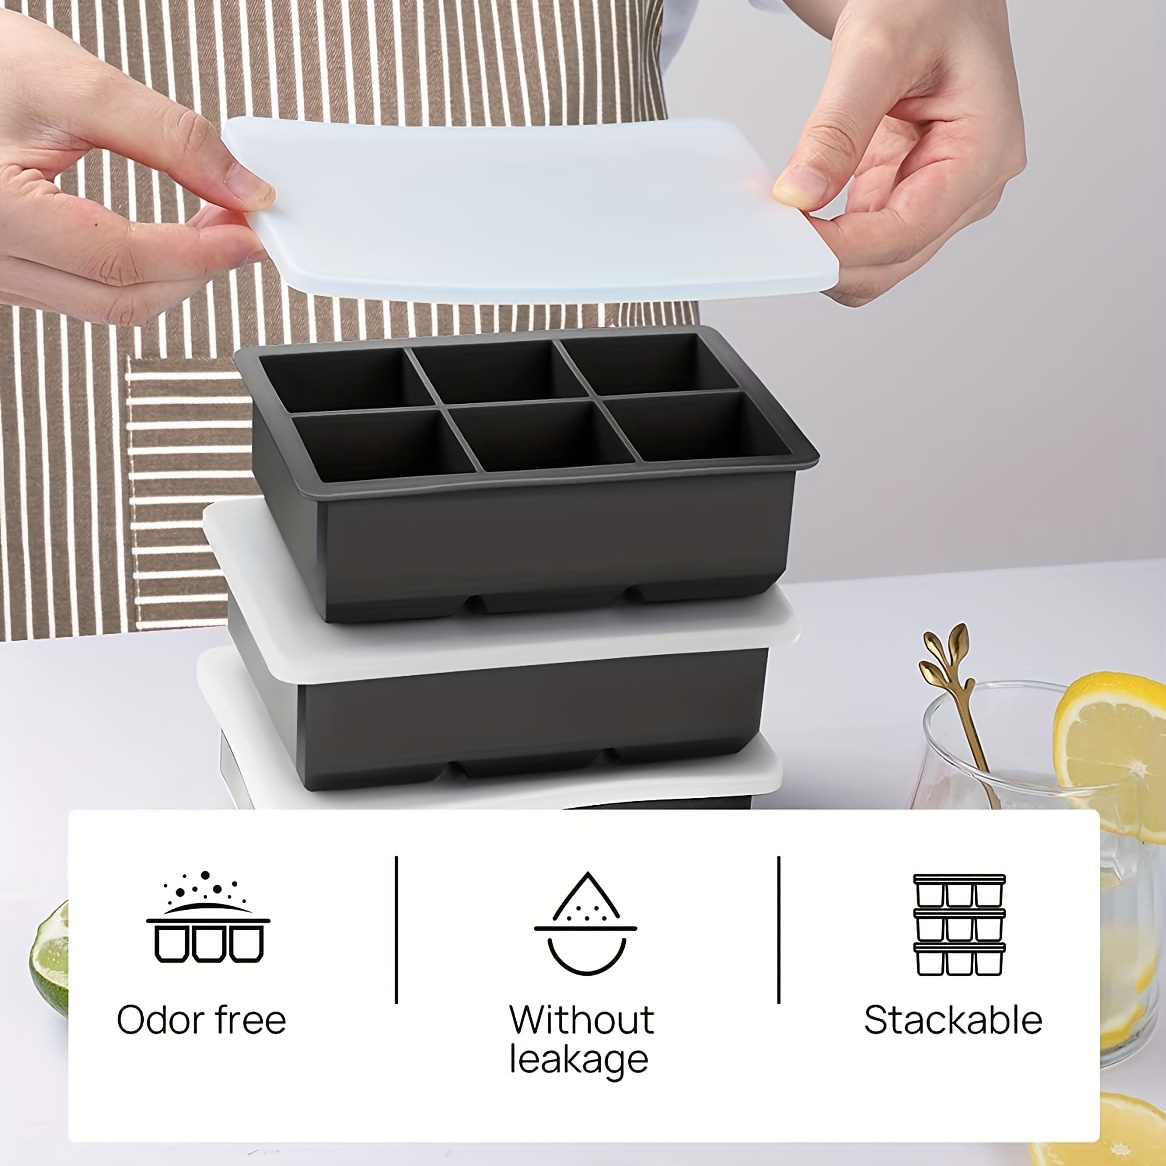 Ice cube tray for large ice cubes - Silicone ice cube tray with lid